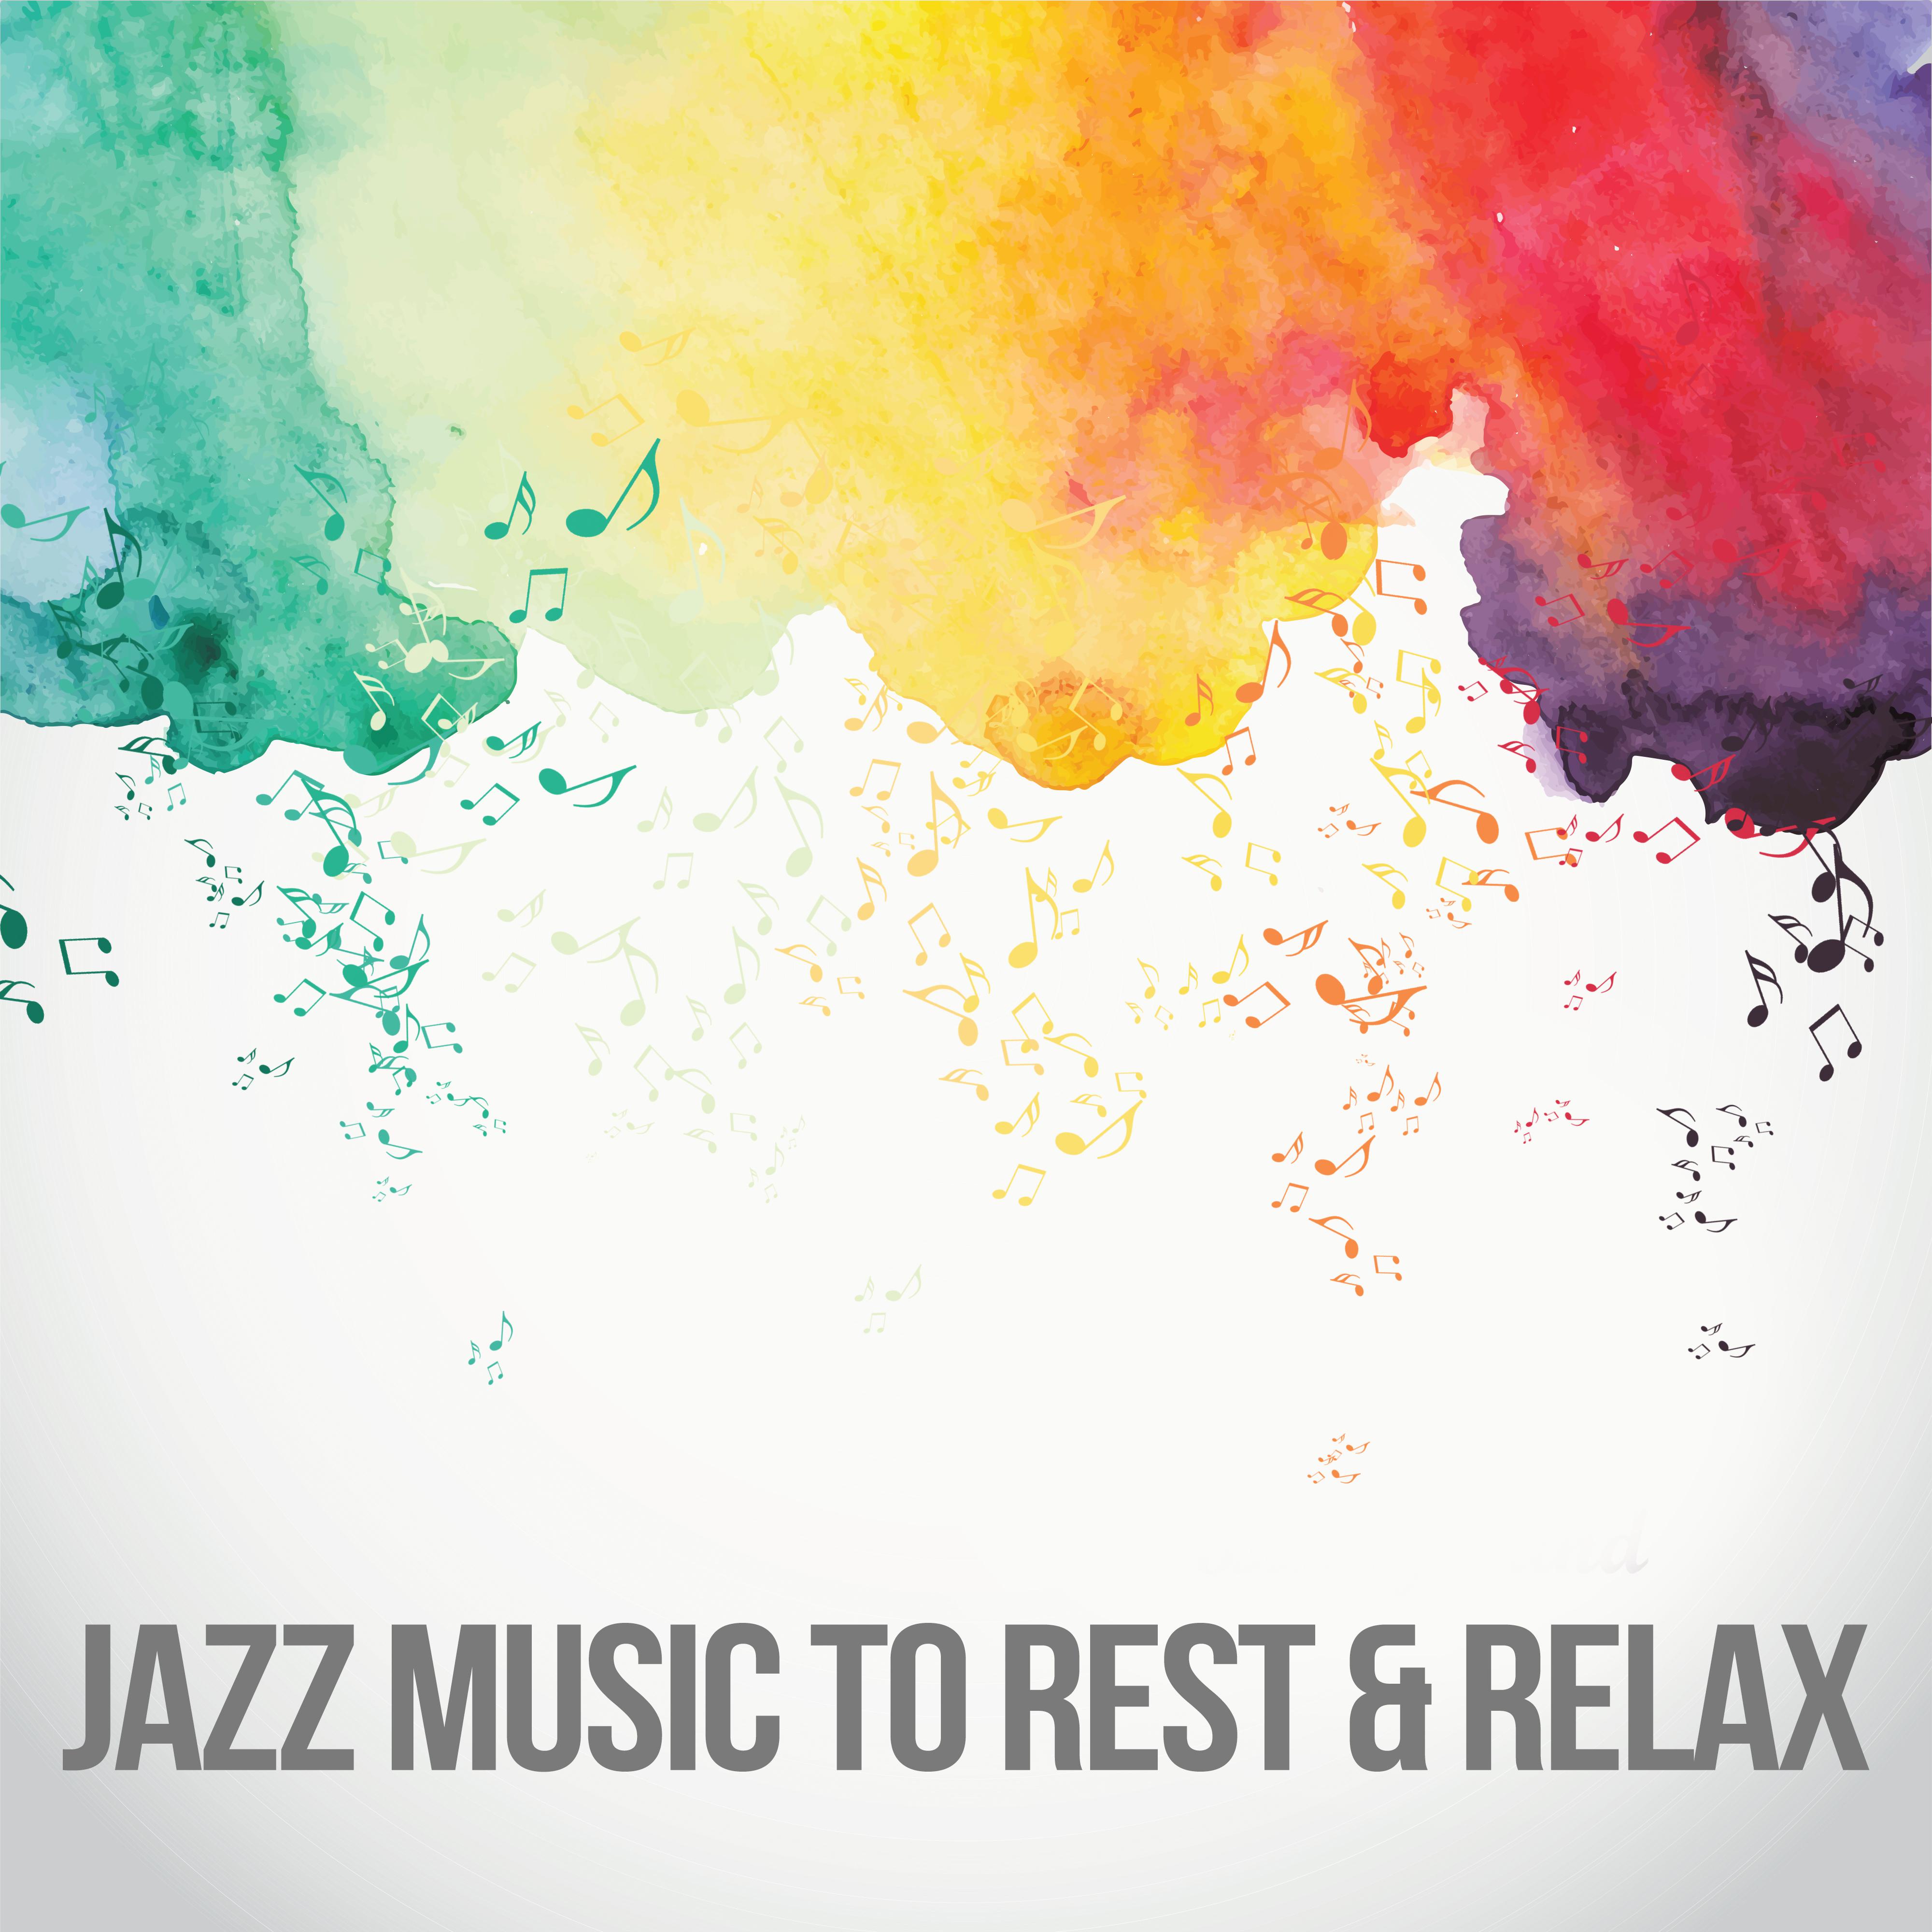 Jazz Music to Rest  Relax  Calm Music, Easy Listening, Background Music, Jazz Relaxation, Chilled Jazz